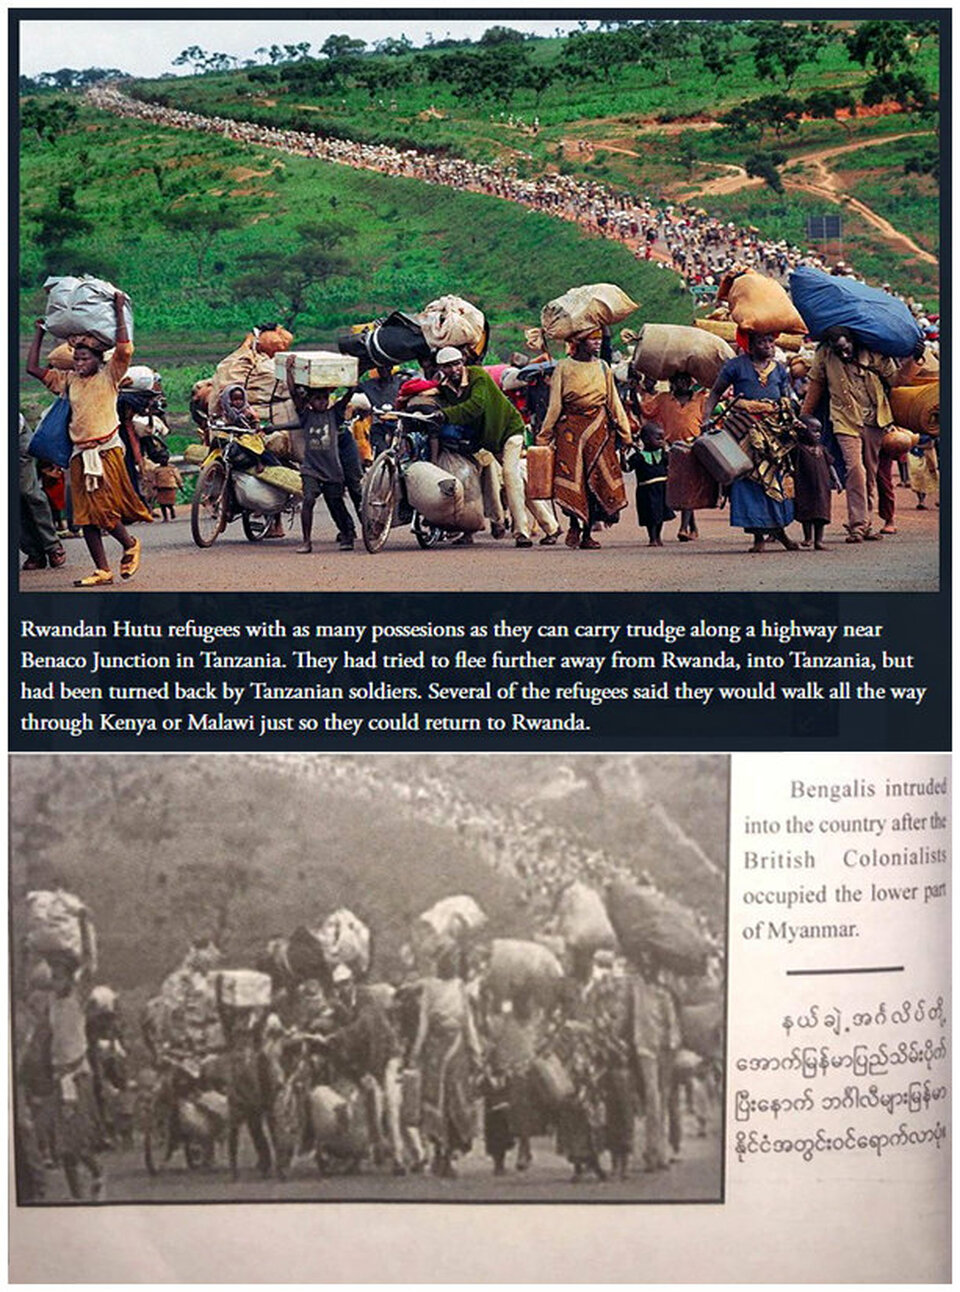 A combination of screenshots shows (top) an image taken from the Pulitzer Prize website depicting the migration of Rwandan Hutu refugees in 1996 following violence in Rwanda. The same image (bottom) appears in the Myanmar army's recently published book on the Rohingya, converted to black-and-white, describing the people as Bengalis entering the country following the British colonial occupation of lower Myanmar. (Reuters Photo/Pittsburgh Post-Gazette/Martha Rial (top)  Reuters Photo/Myanmar Politics and the Tatmadaw: Part 1)